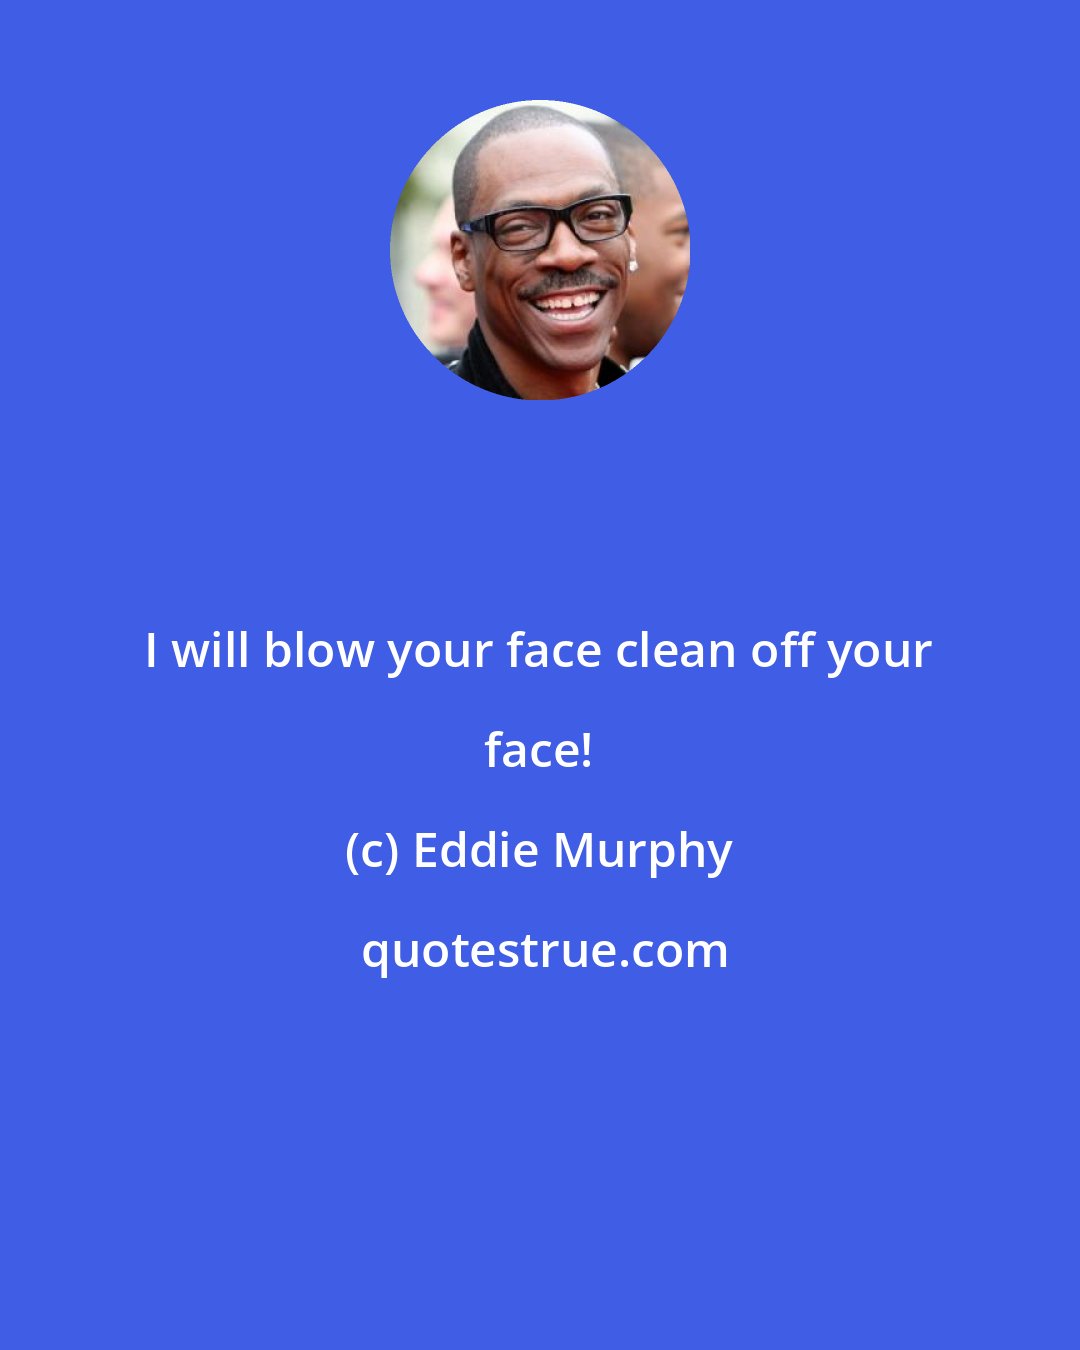 Eddie Murphy: I will blow your face clean off your face!